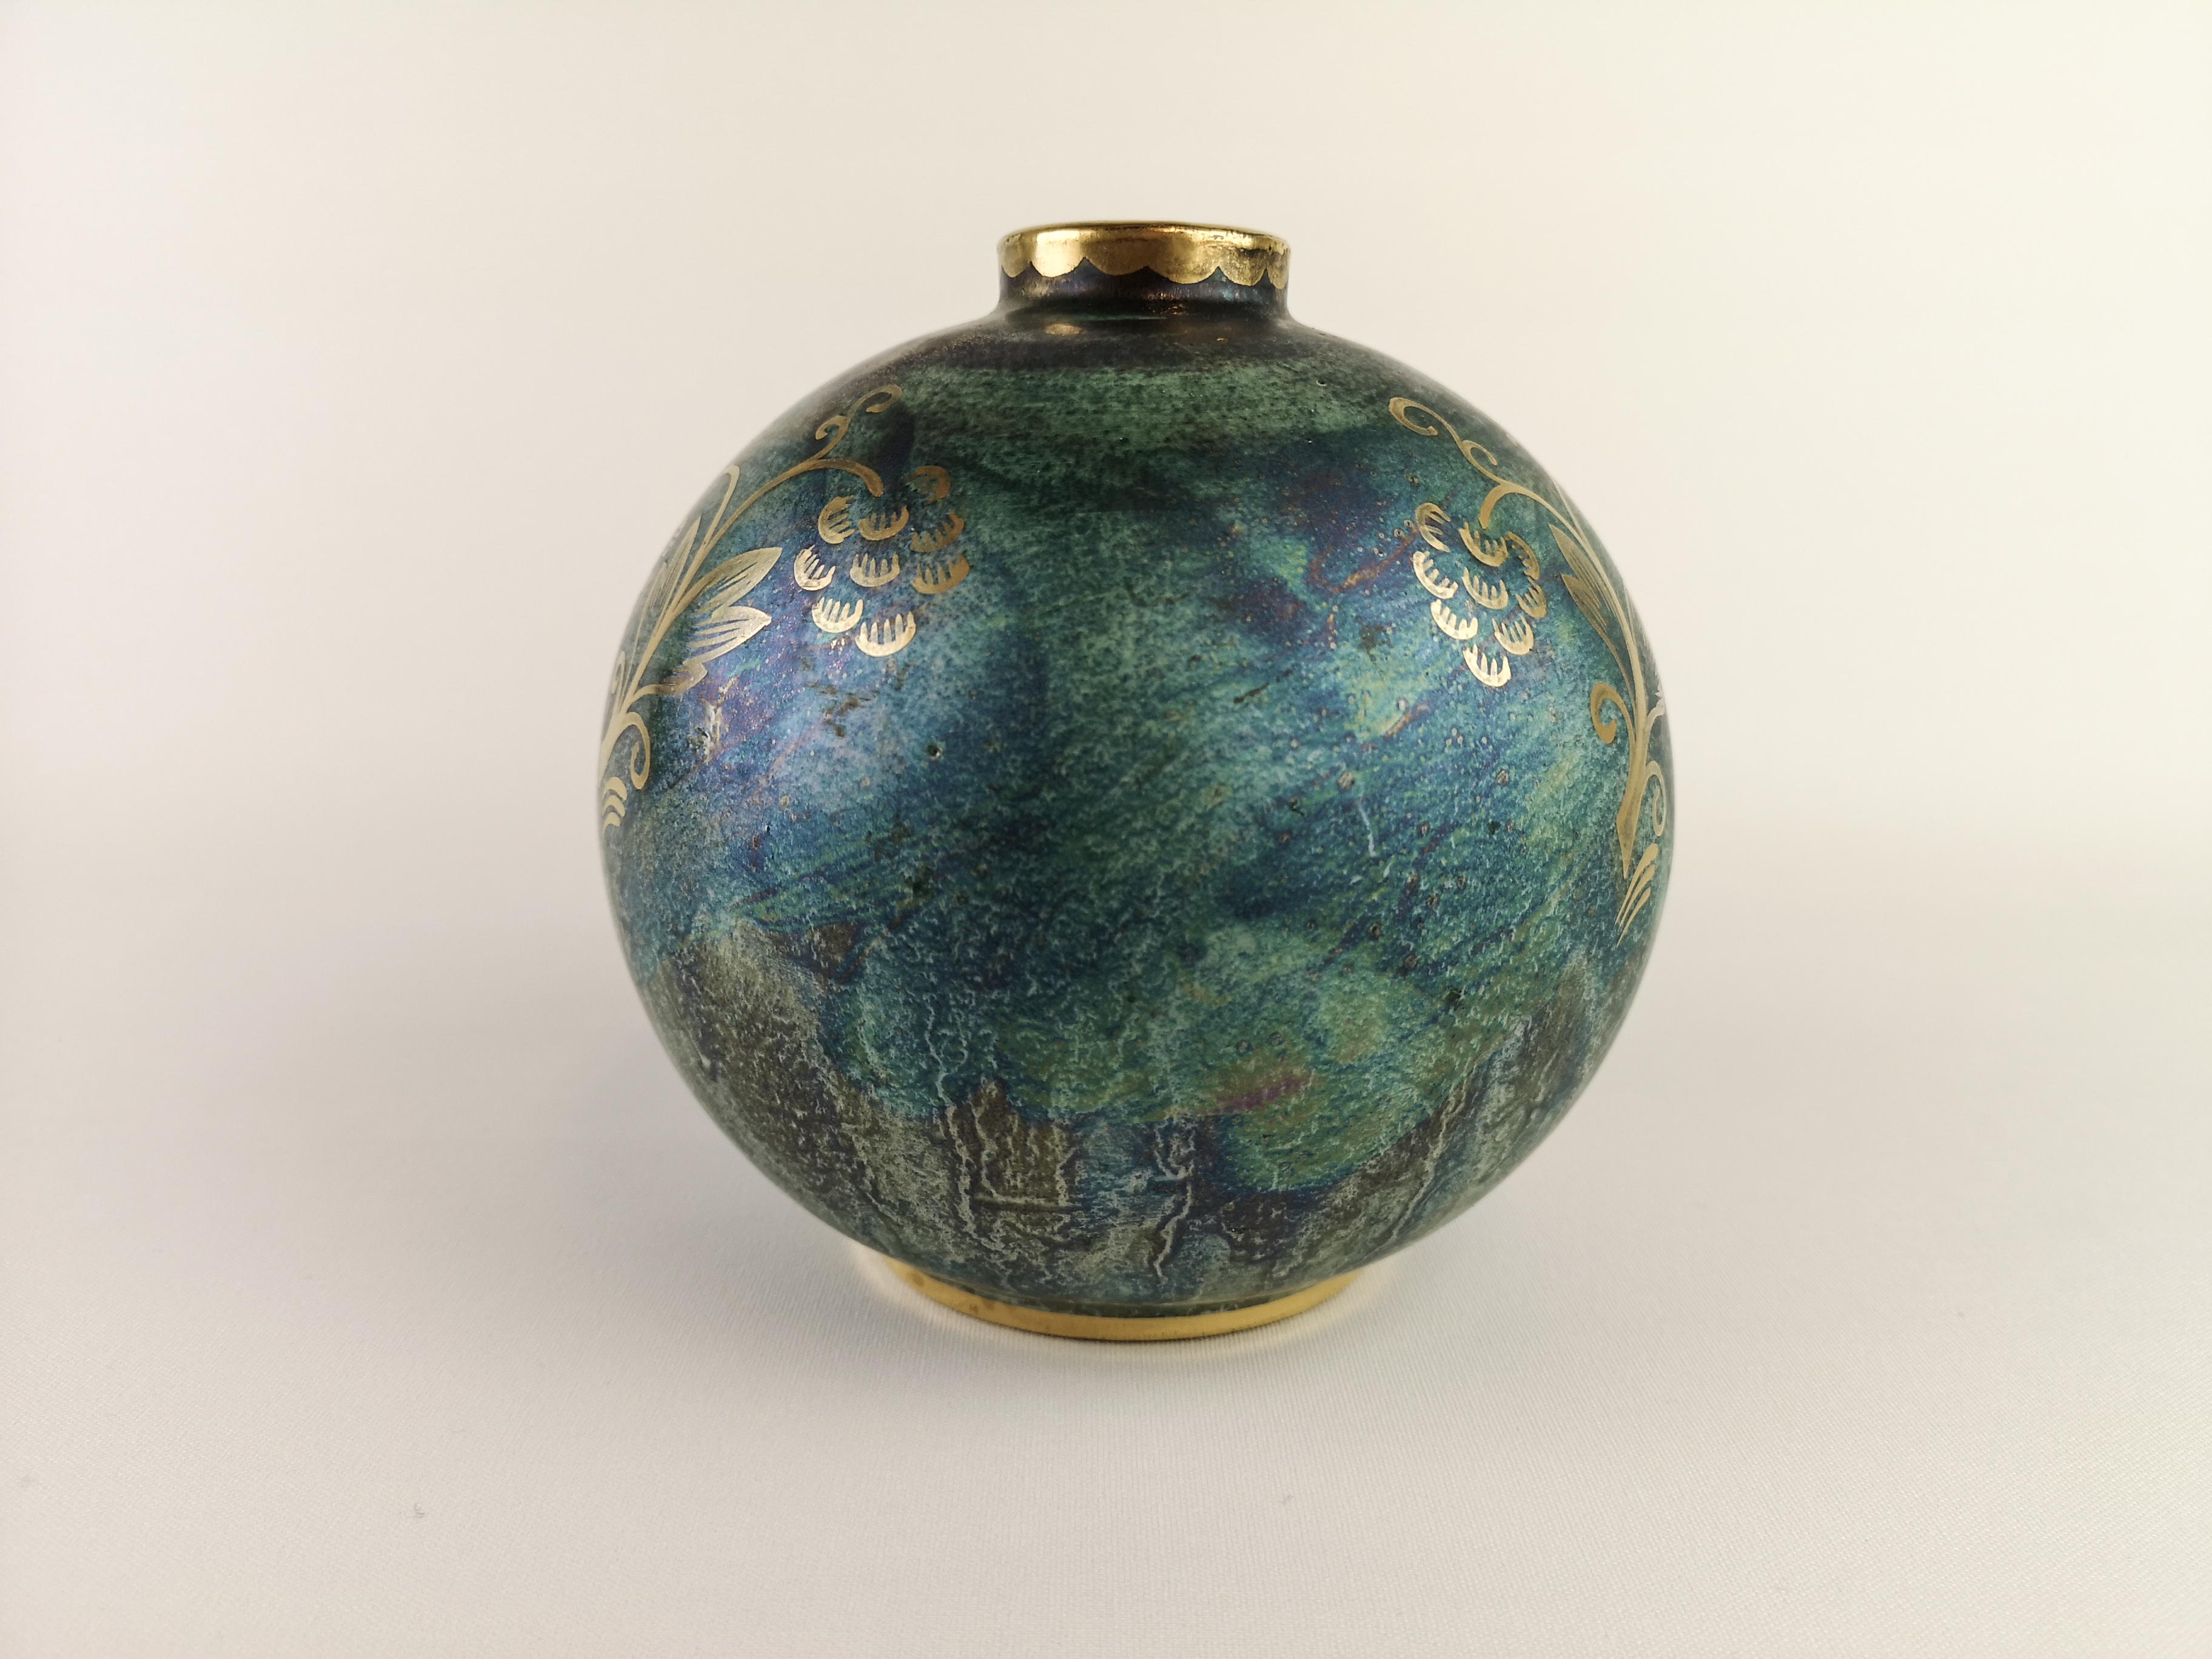 A wonderful globe vase created by Josef Ekberg and manufactured by Gustavsberg Sweden in 1920s. Wonderful Green Glaze with hand-painted gold pattern on the vase. 

Vase in excellent condition.